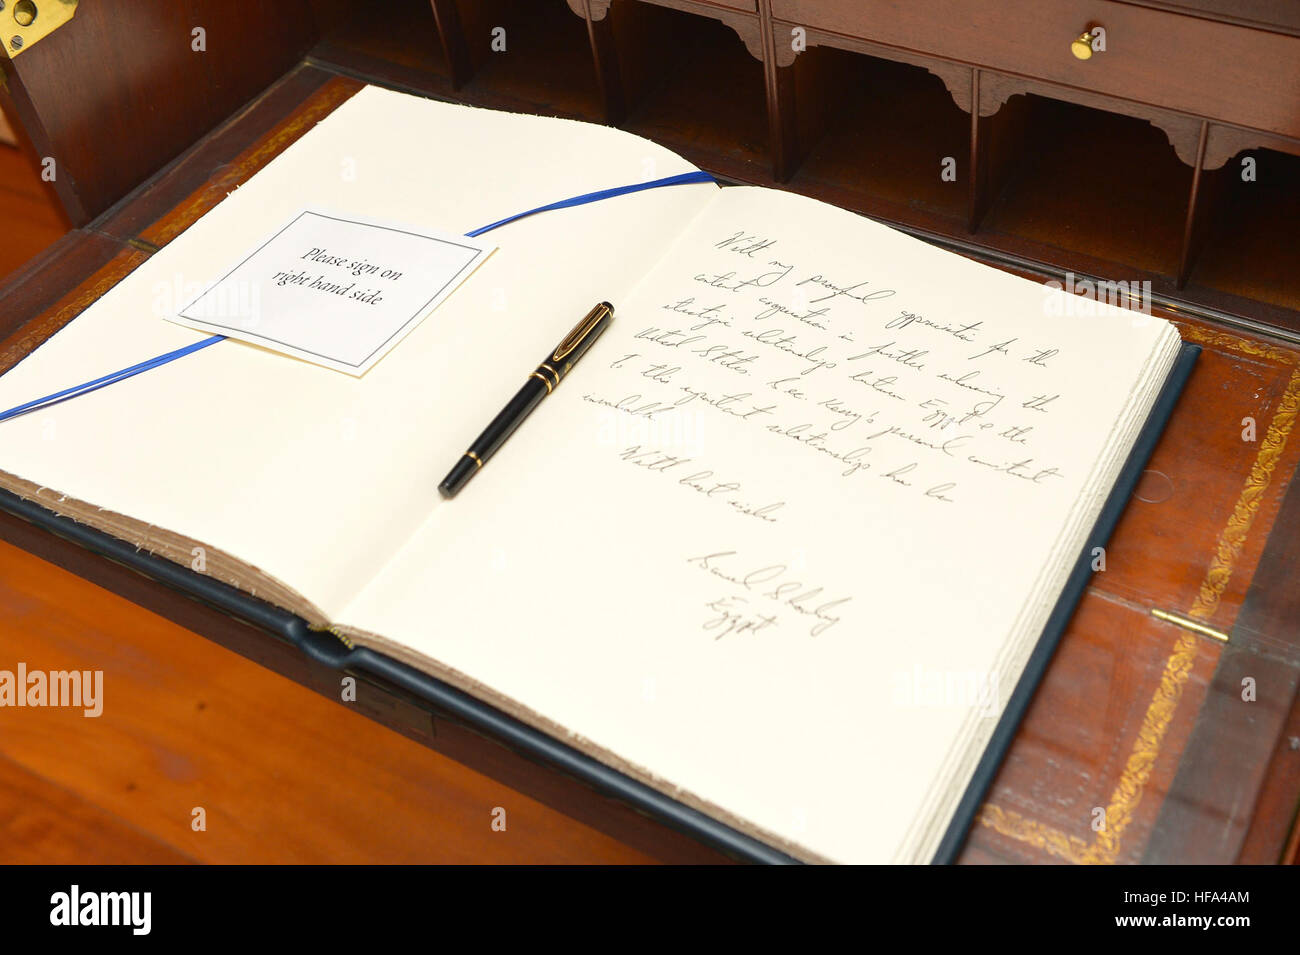 Egyptian Foreign Minister Sameh Shoukry signs U.S. Secretary of State John Kerry's guestbook before their meeting and signing of the U.S.-Egypt cultural property agreement, at the U.S. Department of State in Washington, D.C., on November 30, 2016. Stock Photo